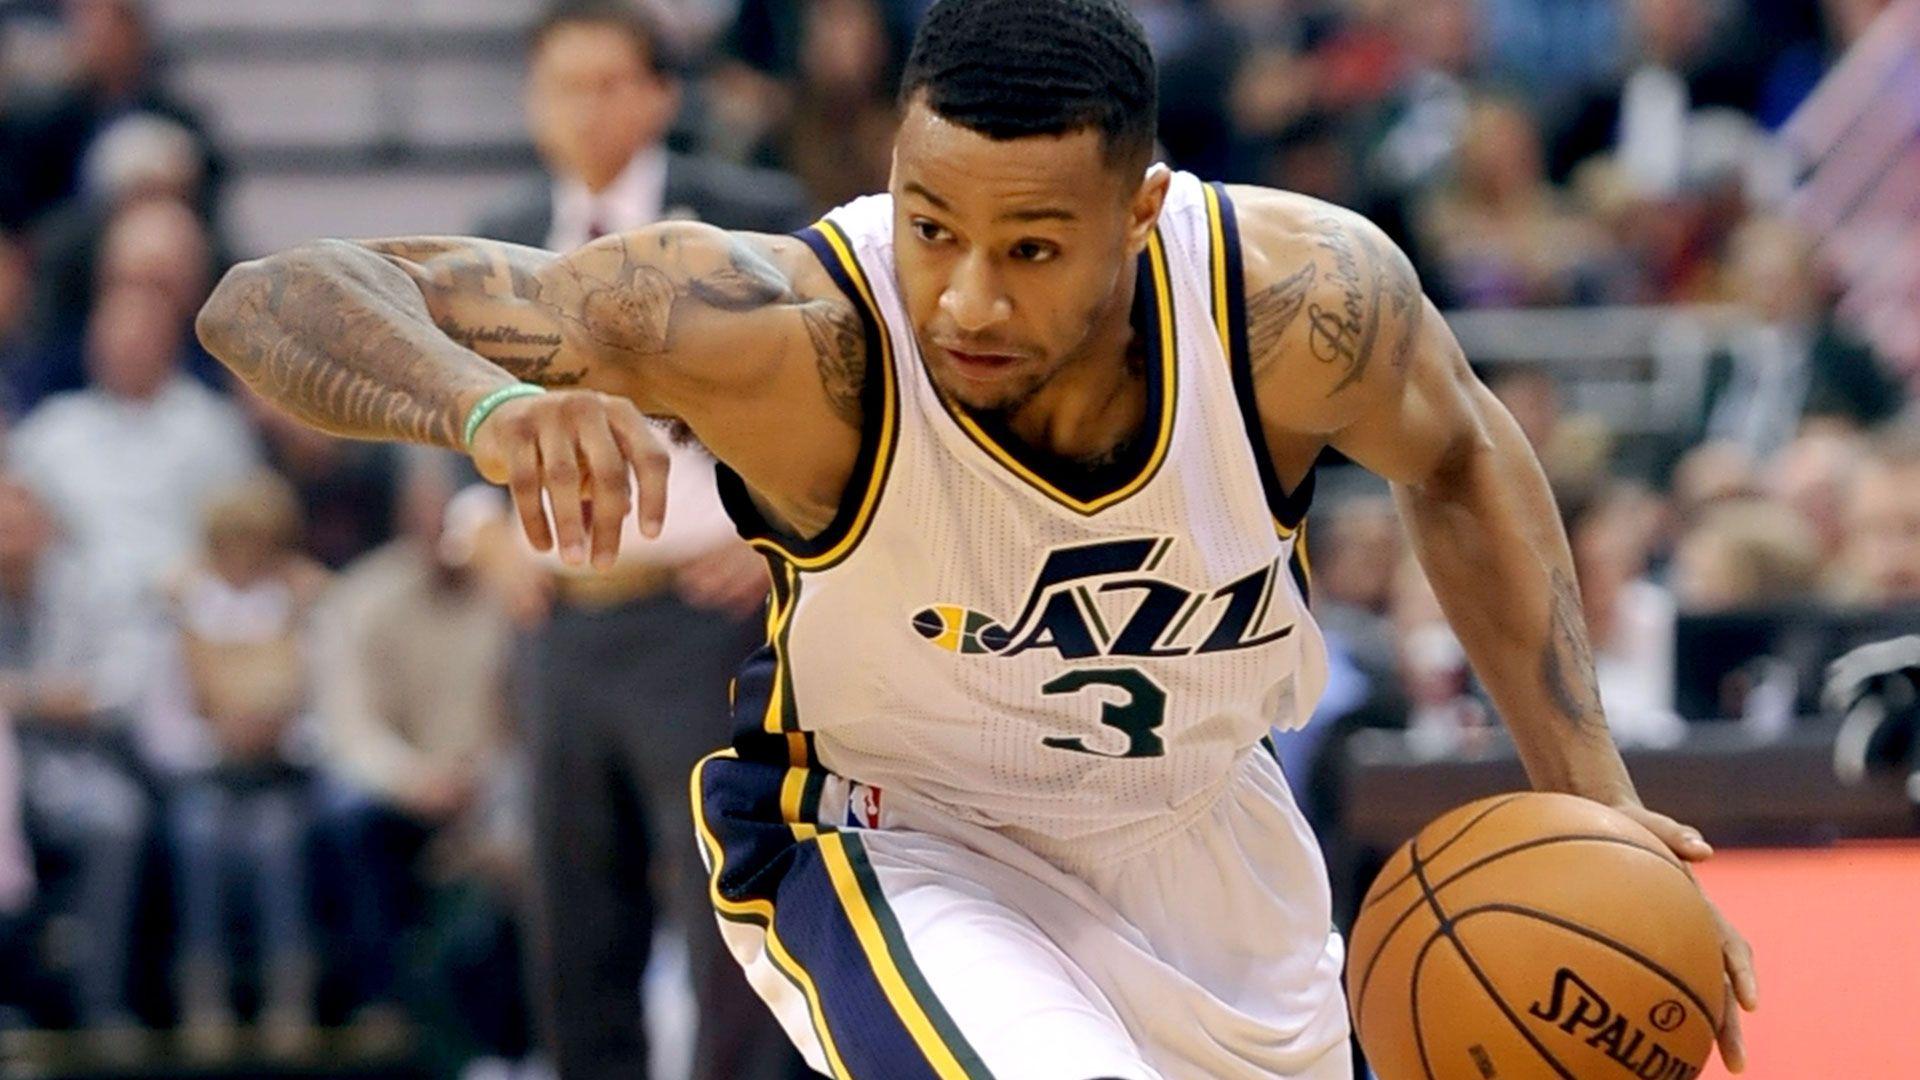 No one wants to play' in Utah, former Jazz guard Trey Burke says